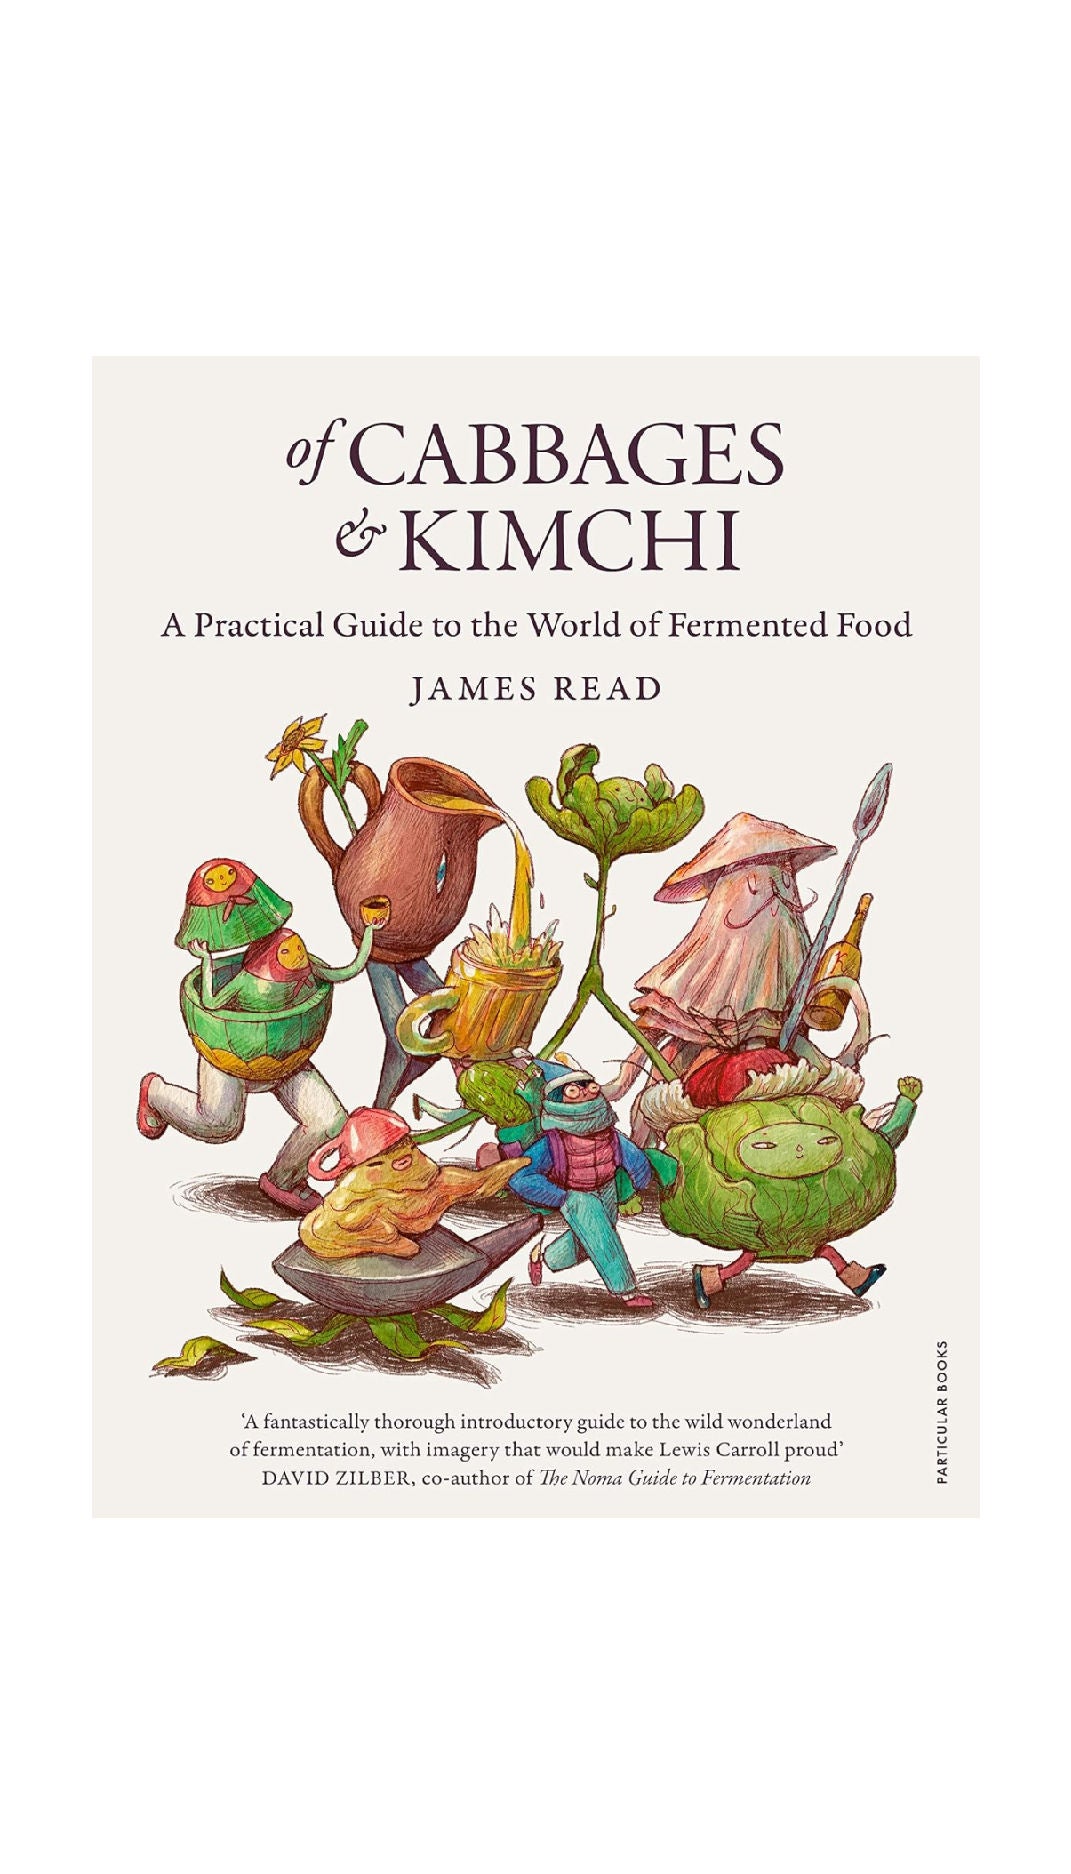 Of Cabbages and Kimchi / COMING MARCH 26TH!